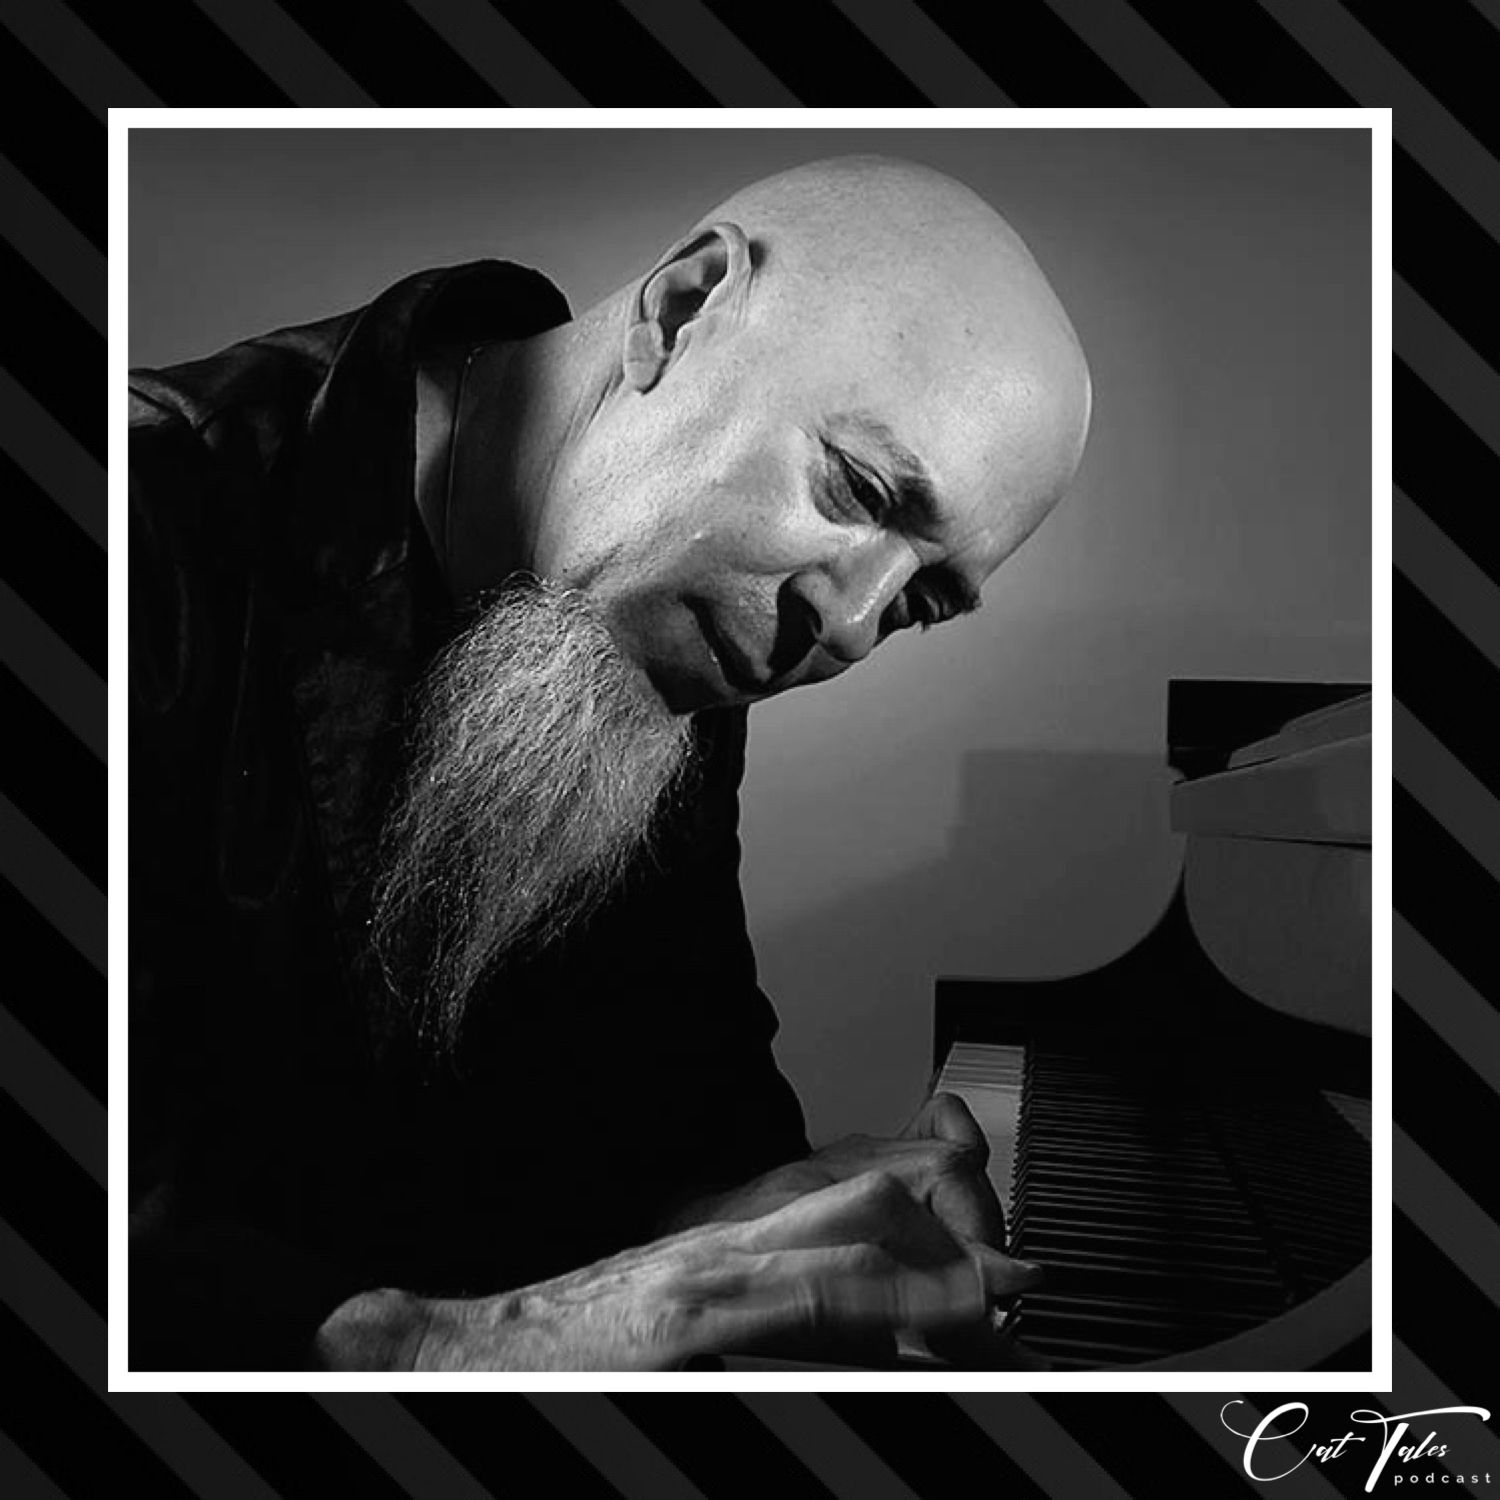 96: The one with Dream Theater’s Jordan Rudess Image